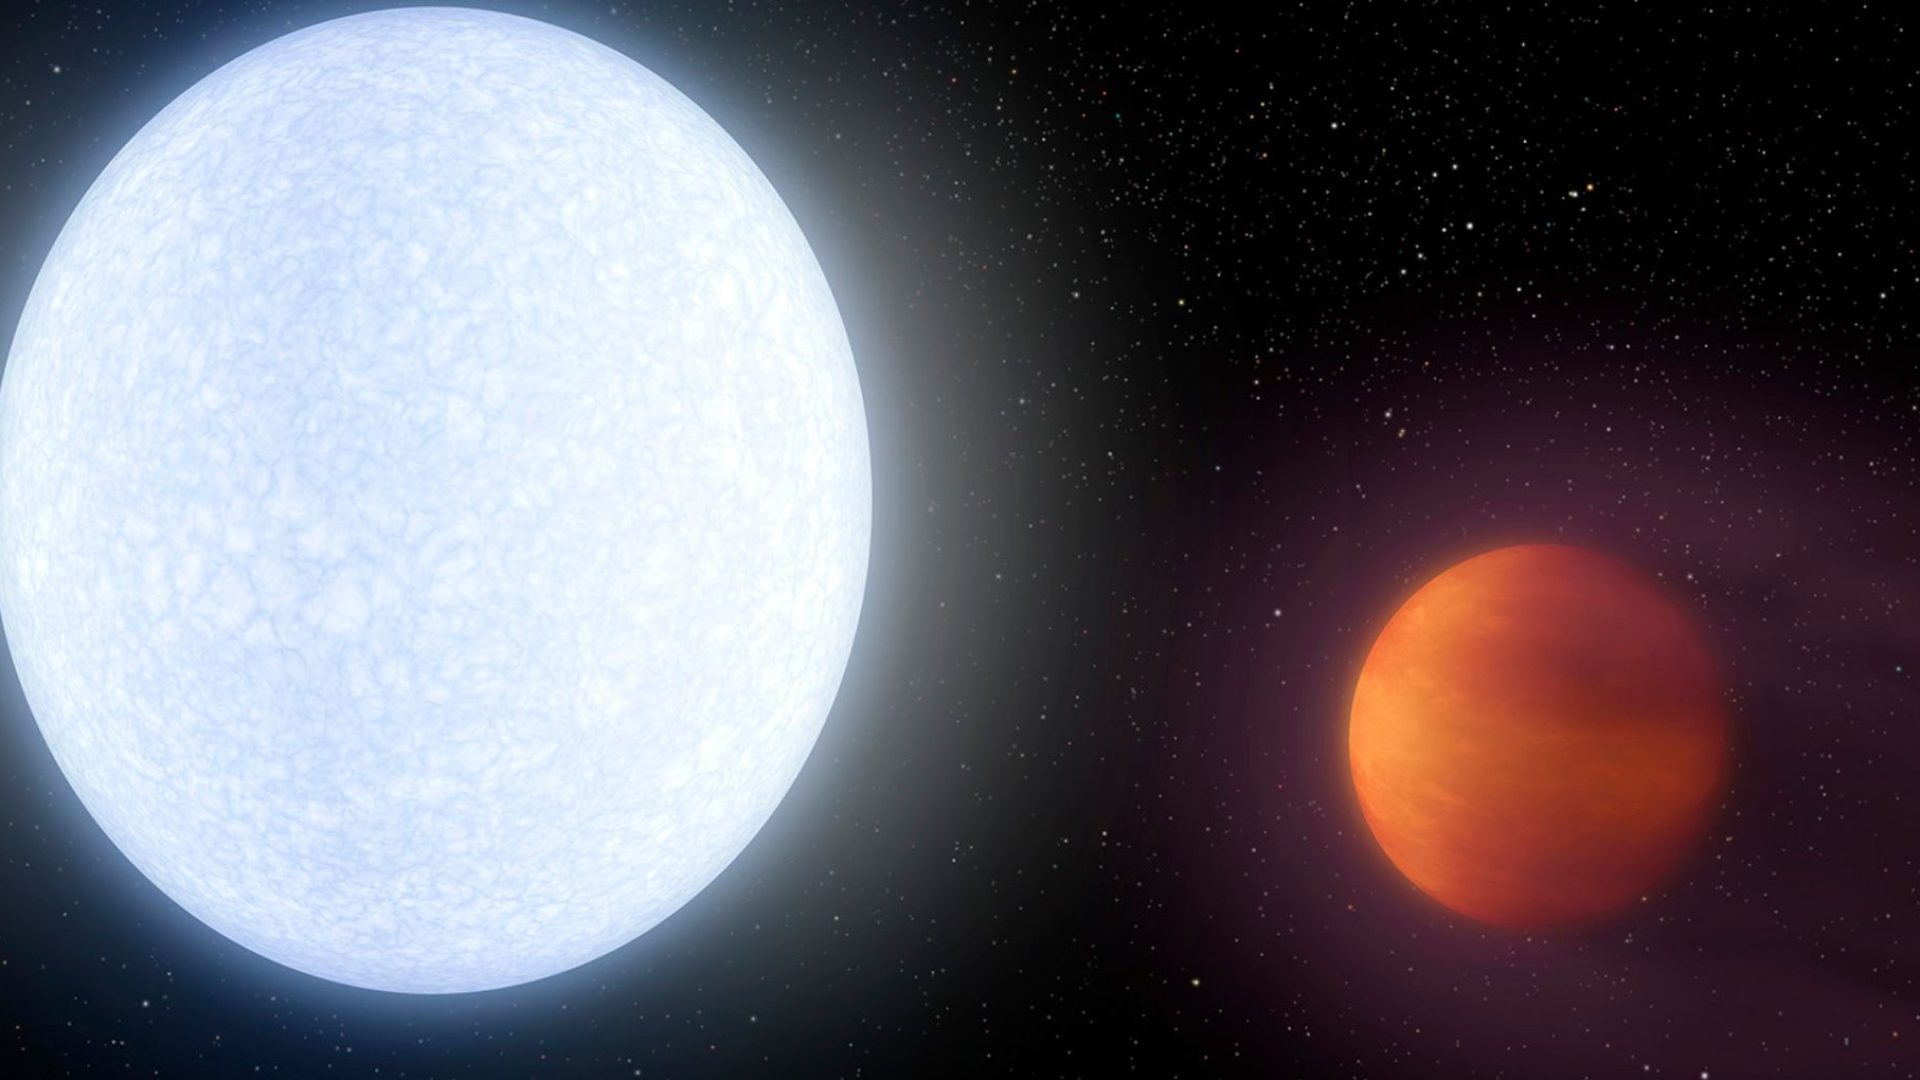 Artist's depiction of the exoplanet KELT-9b, a "hot Jupiter," which sits in a stellar system about 670 light years from our own, has a mass nearly three times larger than Jupiter’s, but also orbits much closer to its home star—so close that temperatures on the planet hit a mind-boggling 7,800 degrees Fahrenheit. Credit: NASA/JPL-Caltech